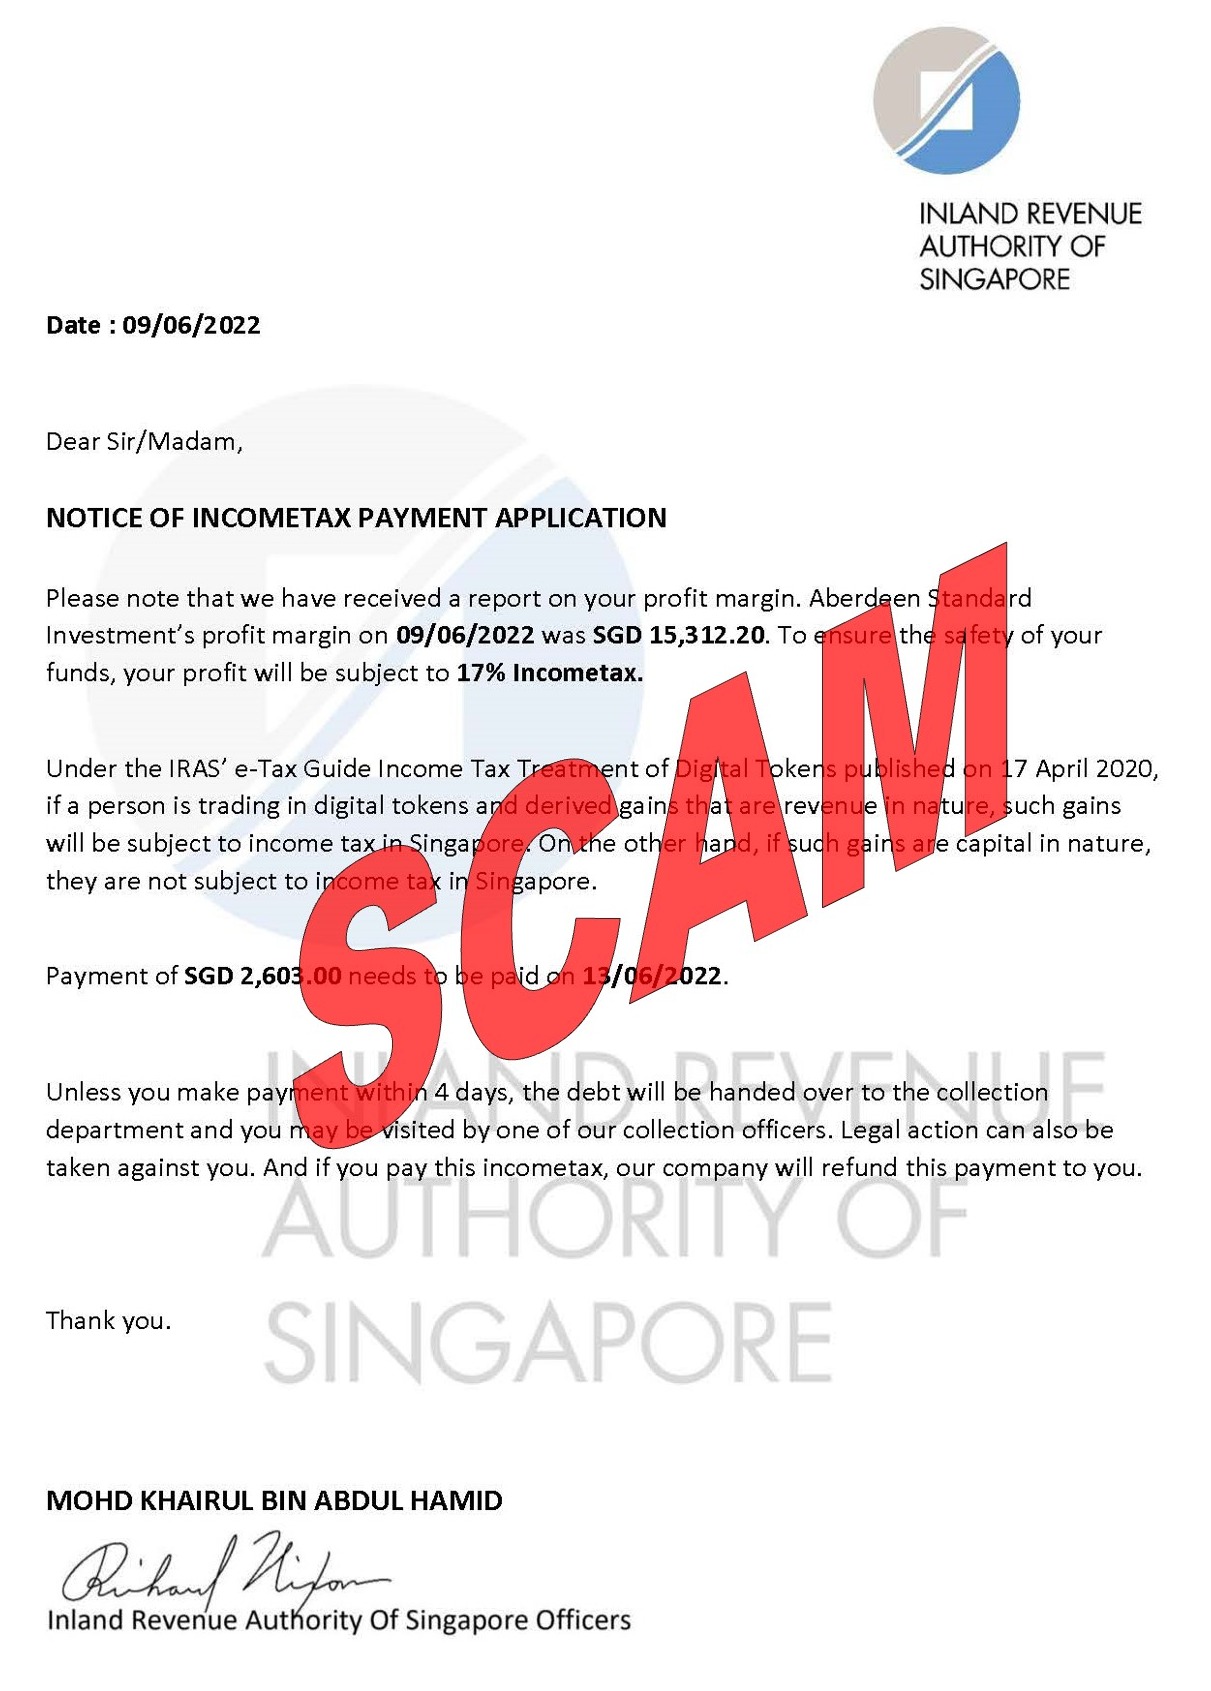 Scam letter seeking tax payment on investment profit